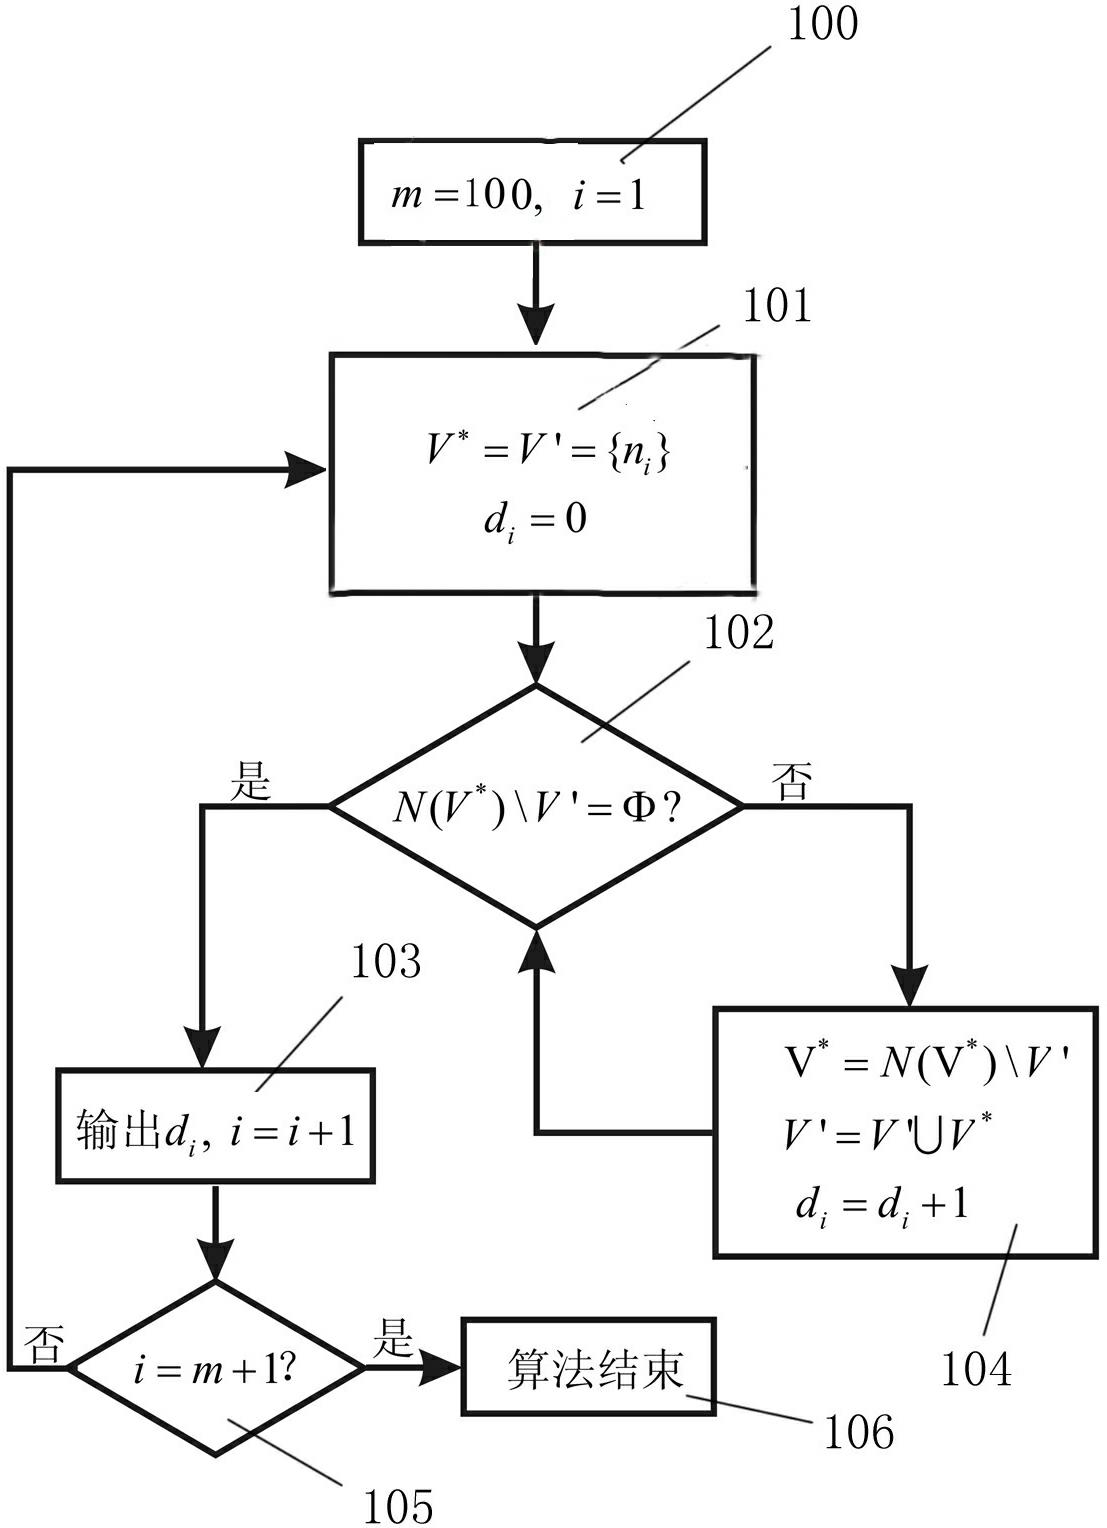 Graph theory analysis method of research hot spots based on co-occurrence of keywords